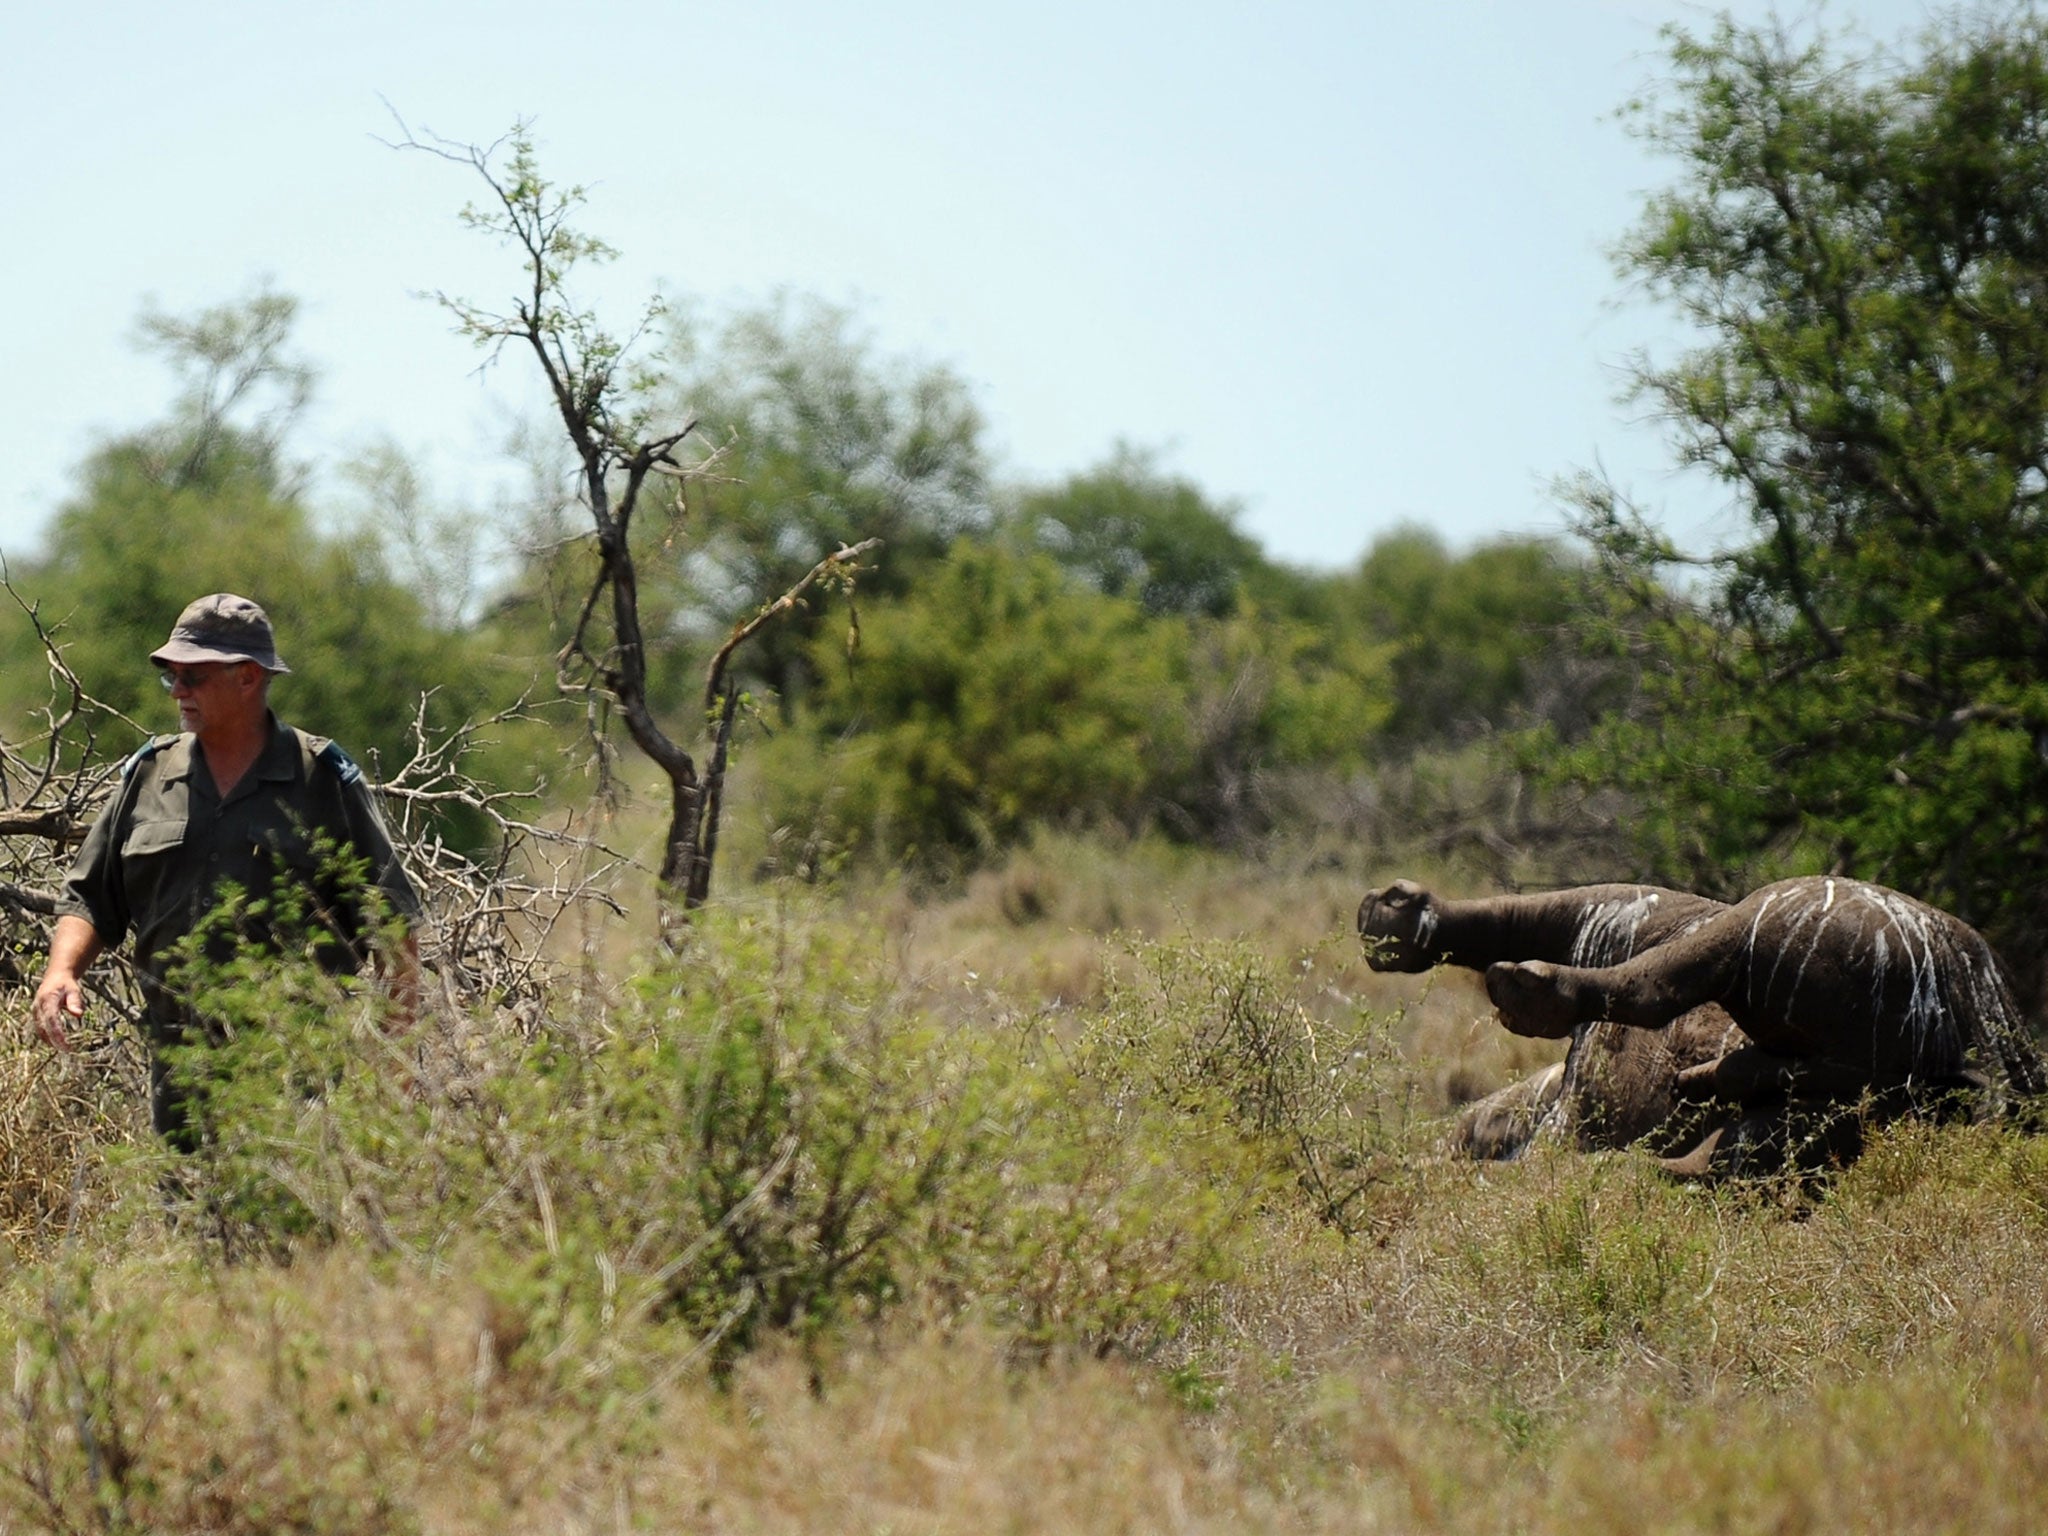 An environmental crime investigator walks past the carcass of a three-day-old rhinoceros killed by poachers. The number of rhinos killed in South Africa for their horns soared to more than 1,000 last year